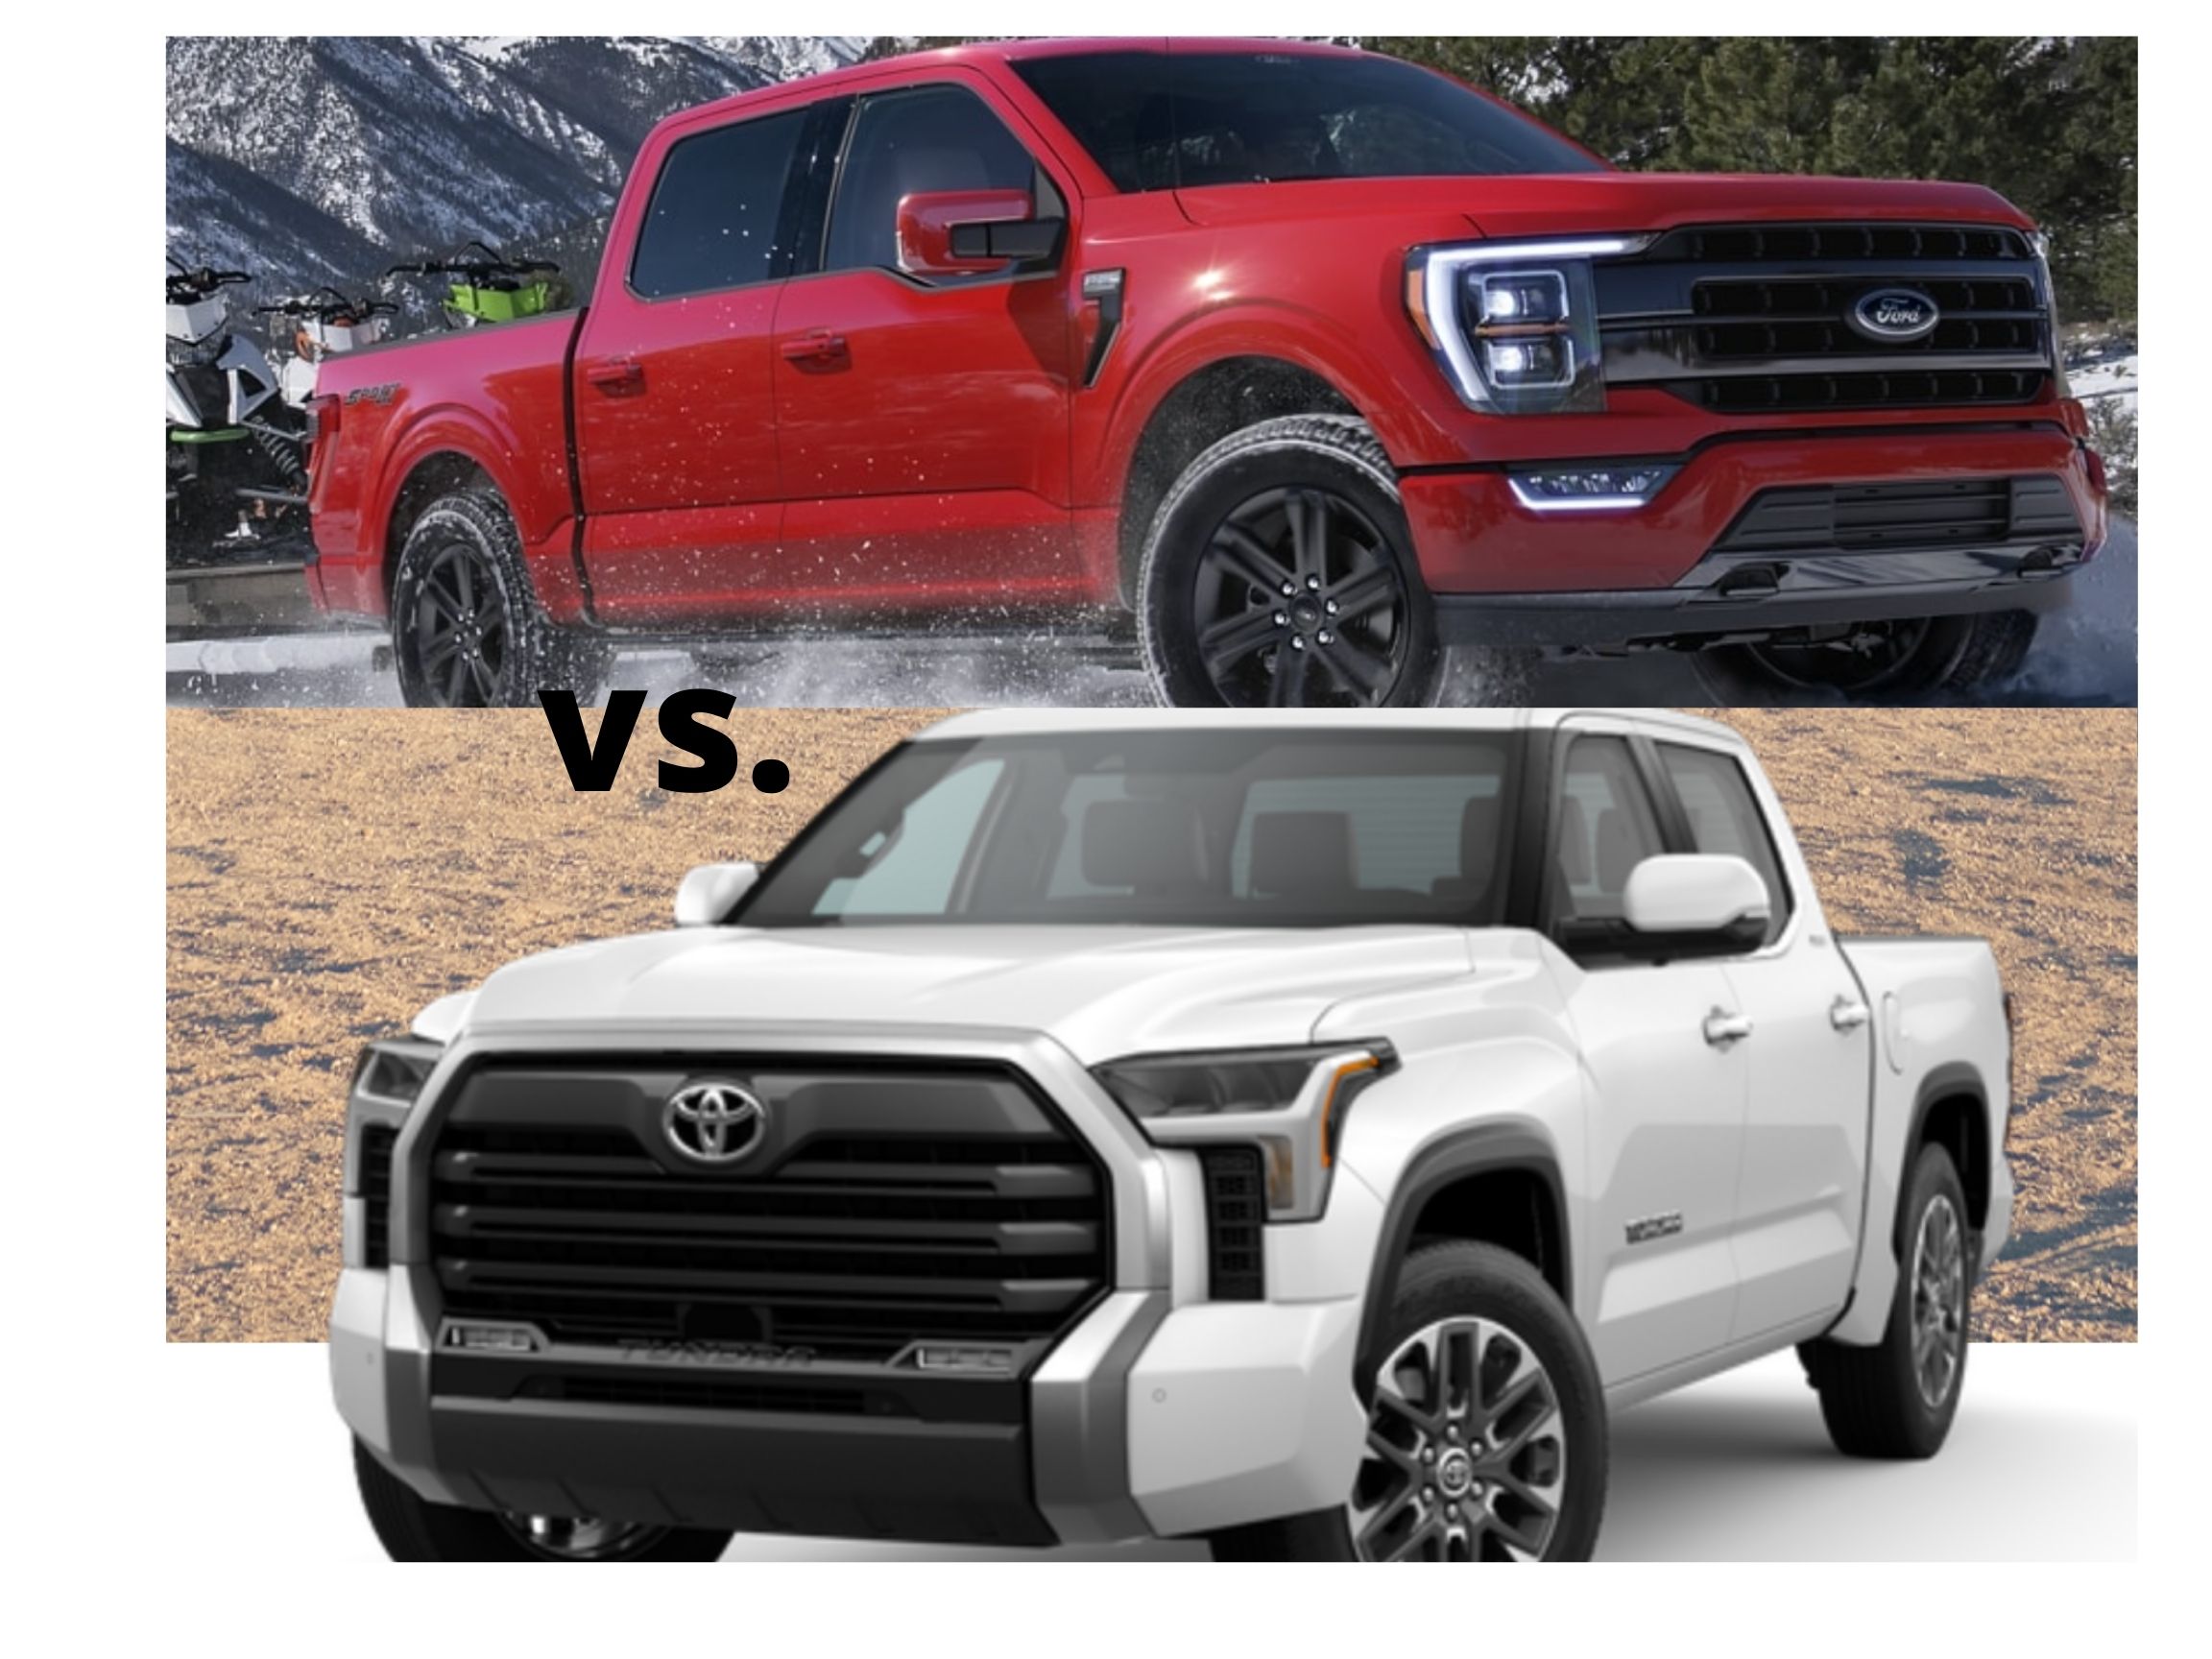 Ford F150 vs Toyota Tundra Which Pickup Truck Is Best?